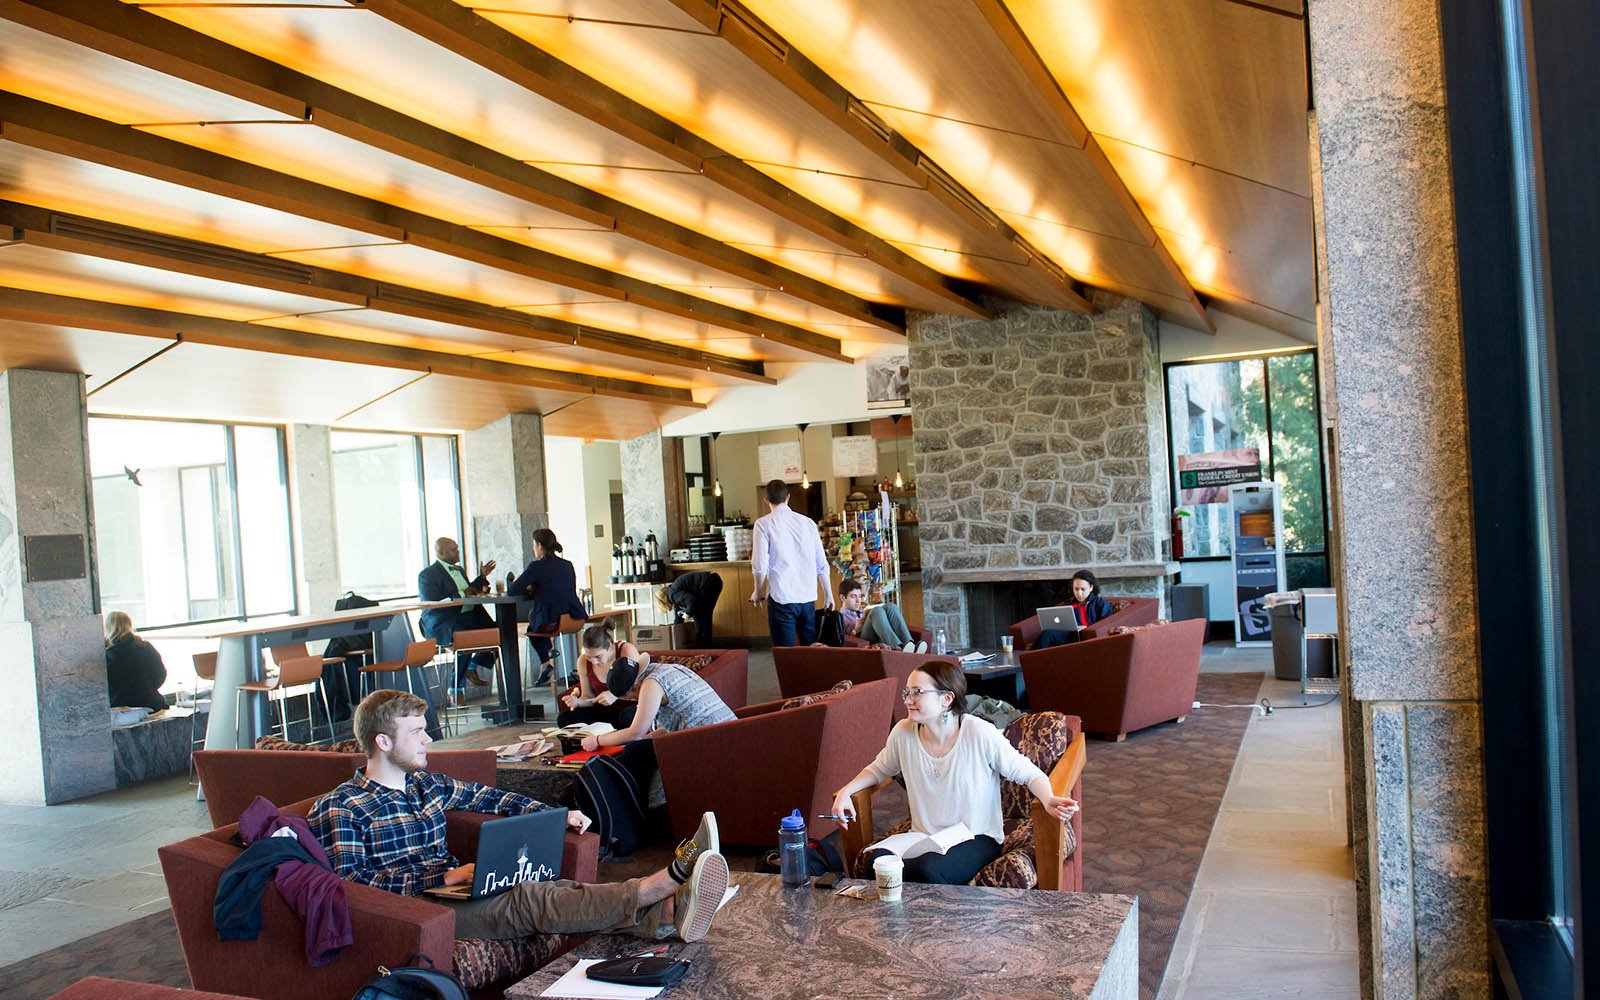 The common space and coffee shop of Kohlberg Hall